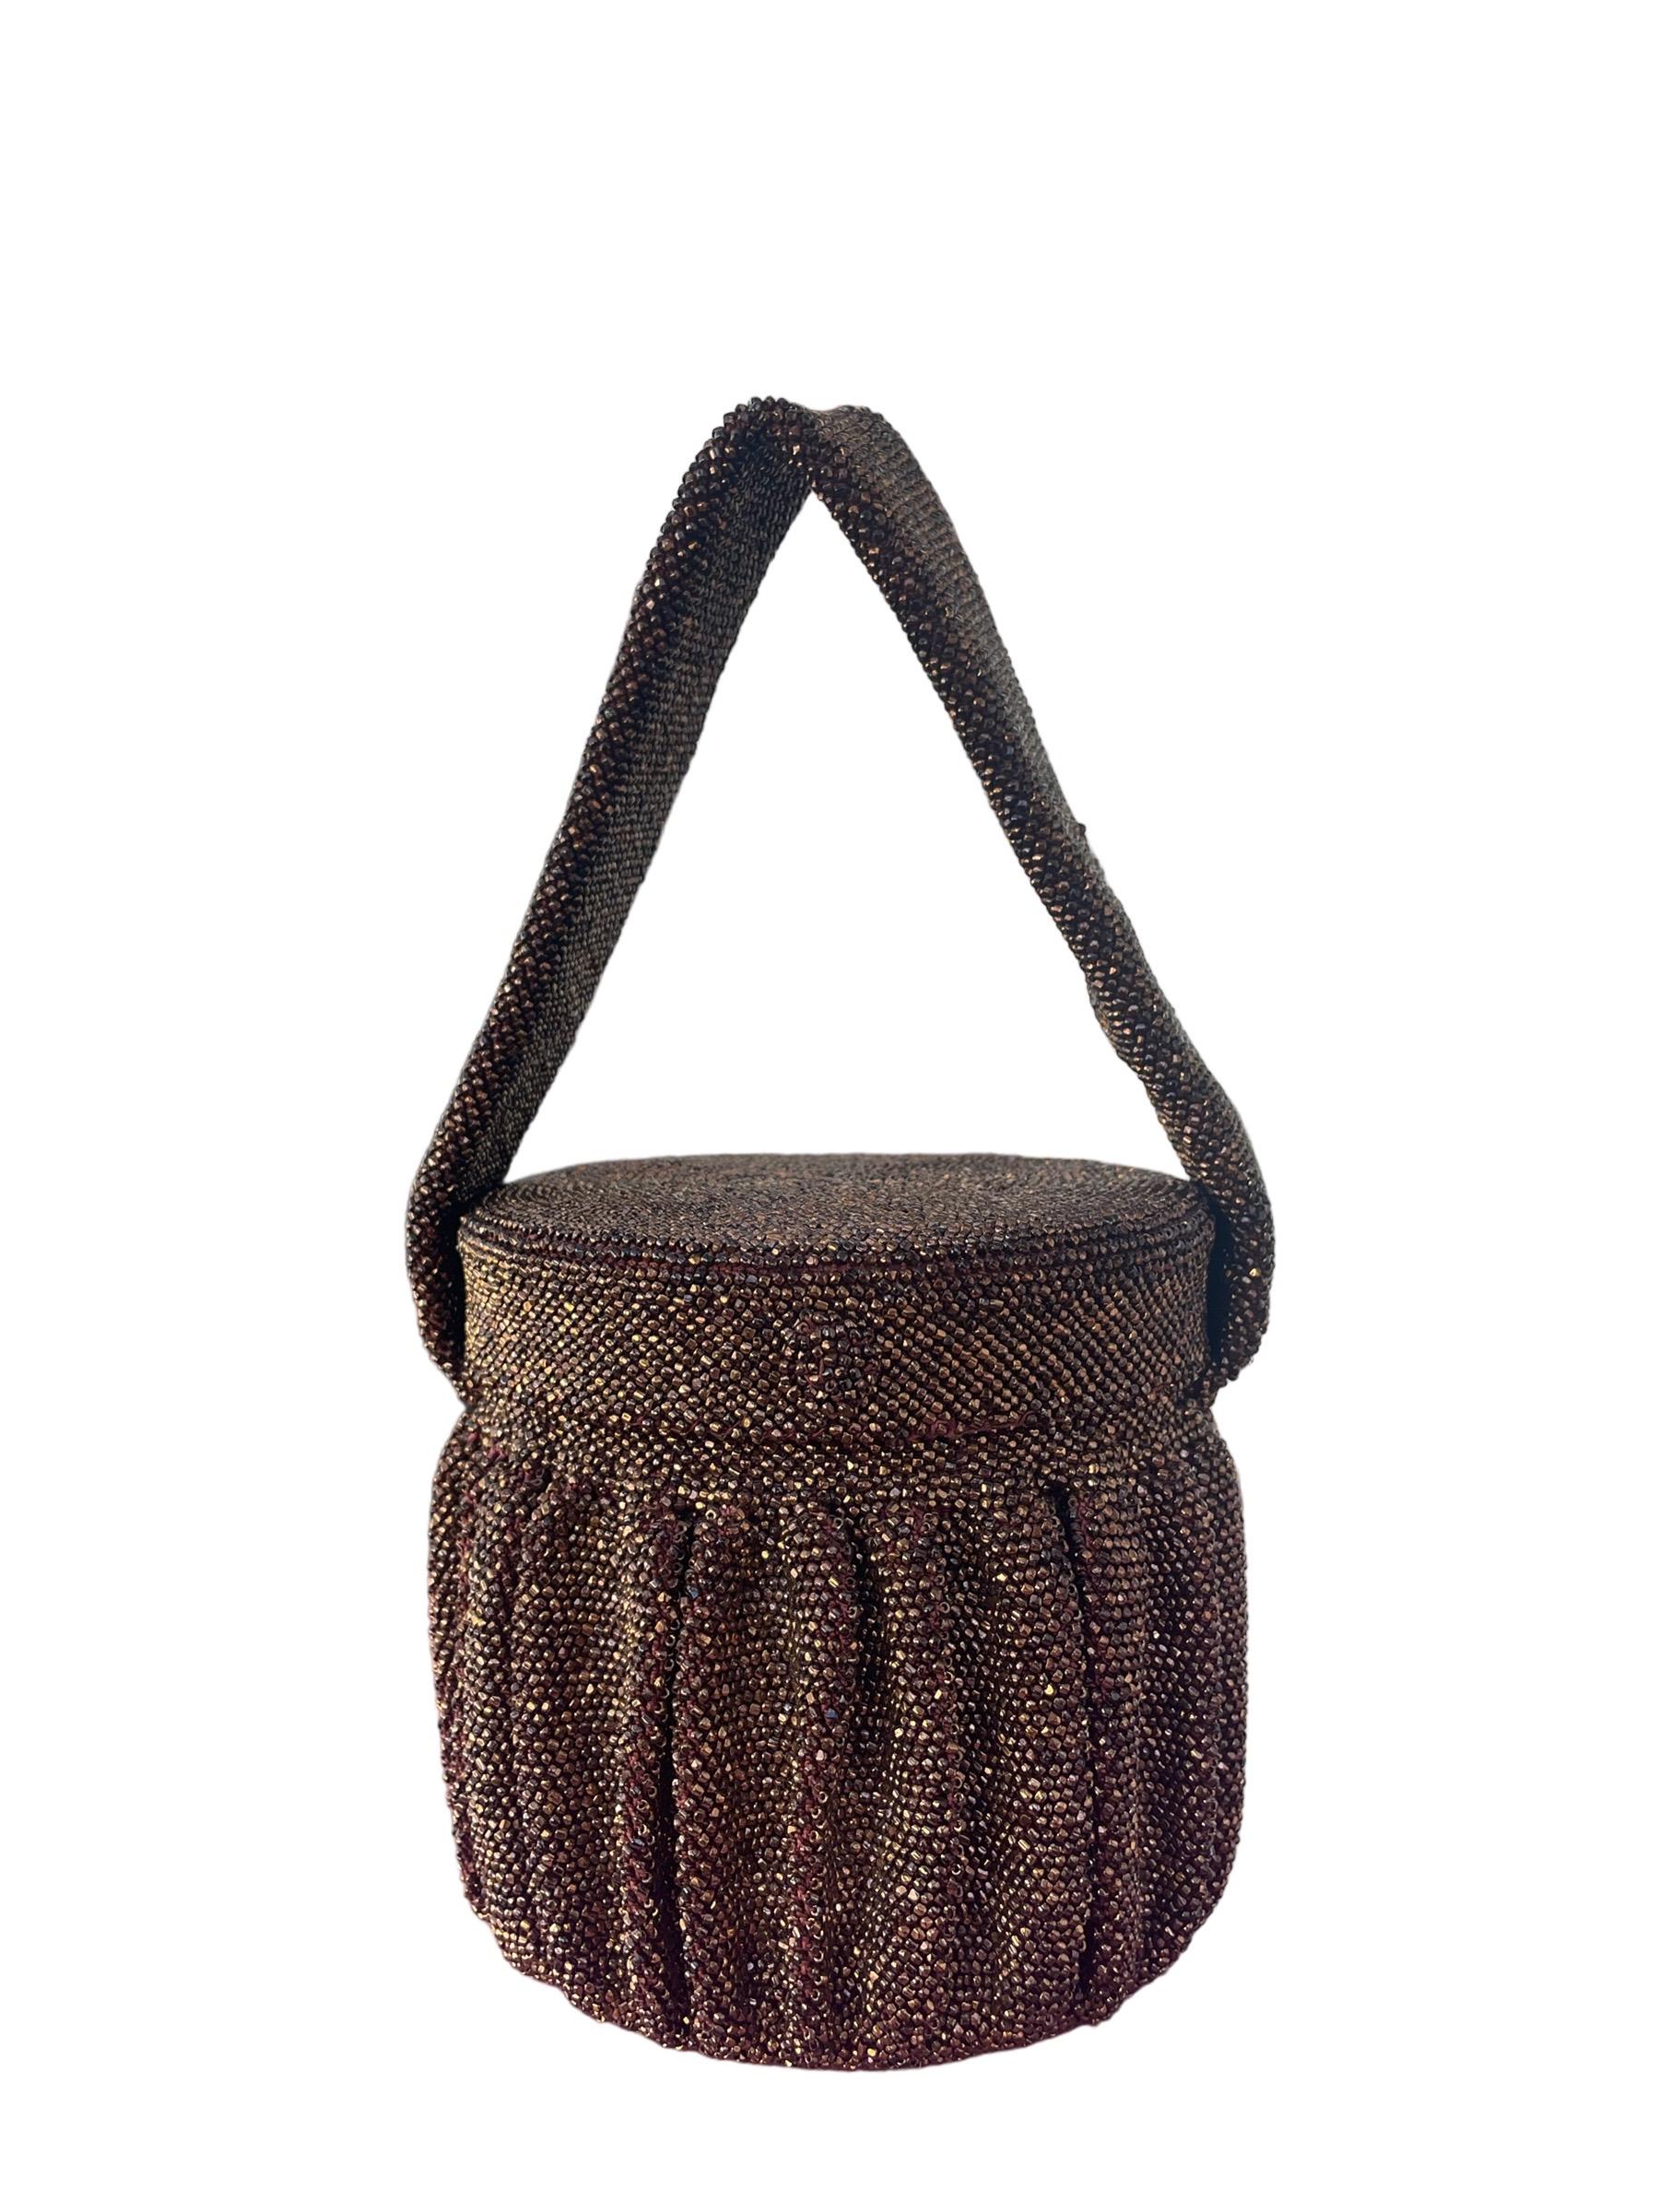 1940s Bronze Steel Cut Bead Circular Box Bag w/ Mirror

Circular shaped bucket box bag with an exterior of glass bronze beads and pleated detailing.

Attached lid with circular mirror inside. Interior maroon satin. Some darker staining on the rim